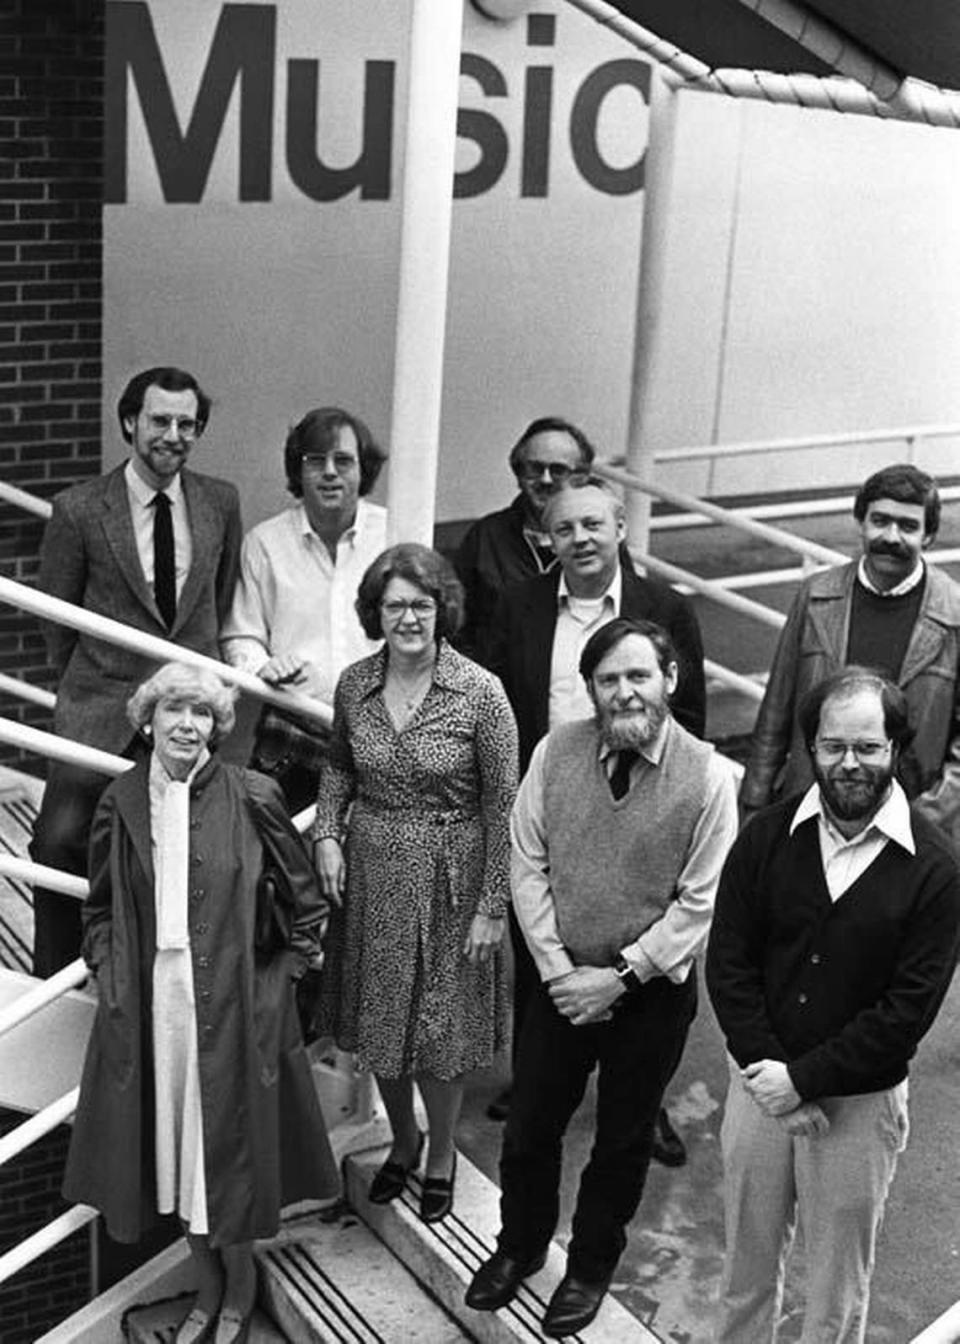 University of North Carolina School of the Arts music staff, 1981. Stephen Shipps is pictured second from the left in the back row.